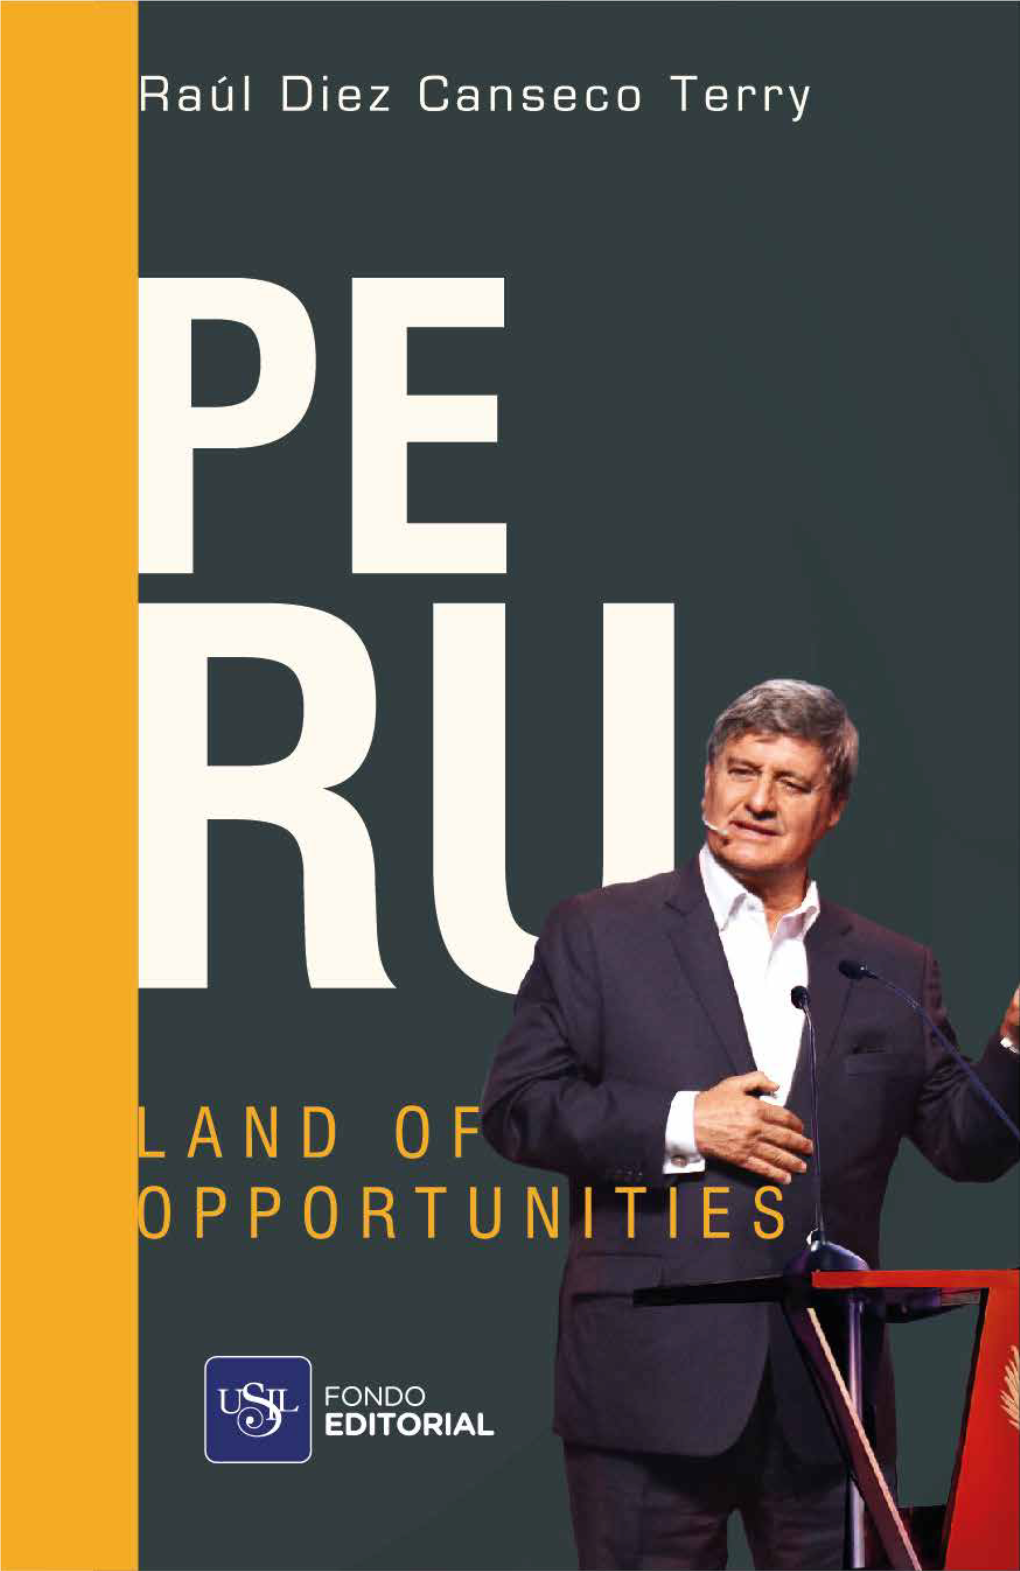 Peru Is a Country of Opportunities. We Only Need to Start…